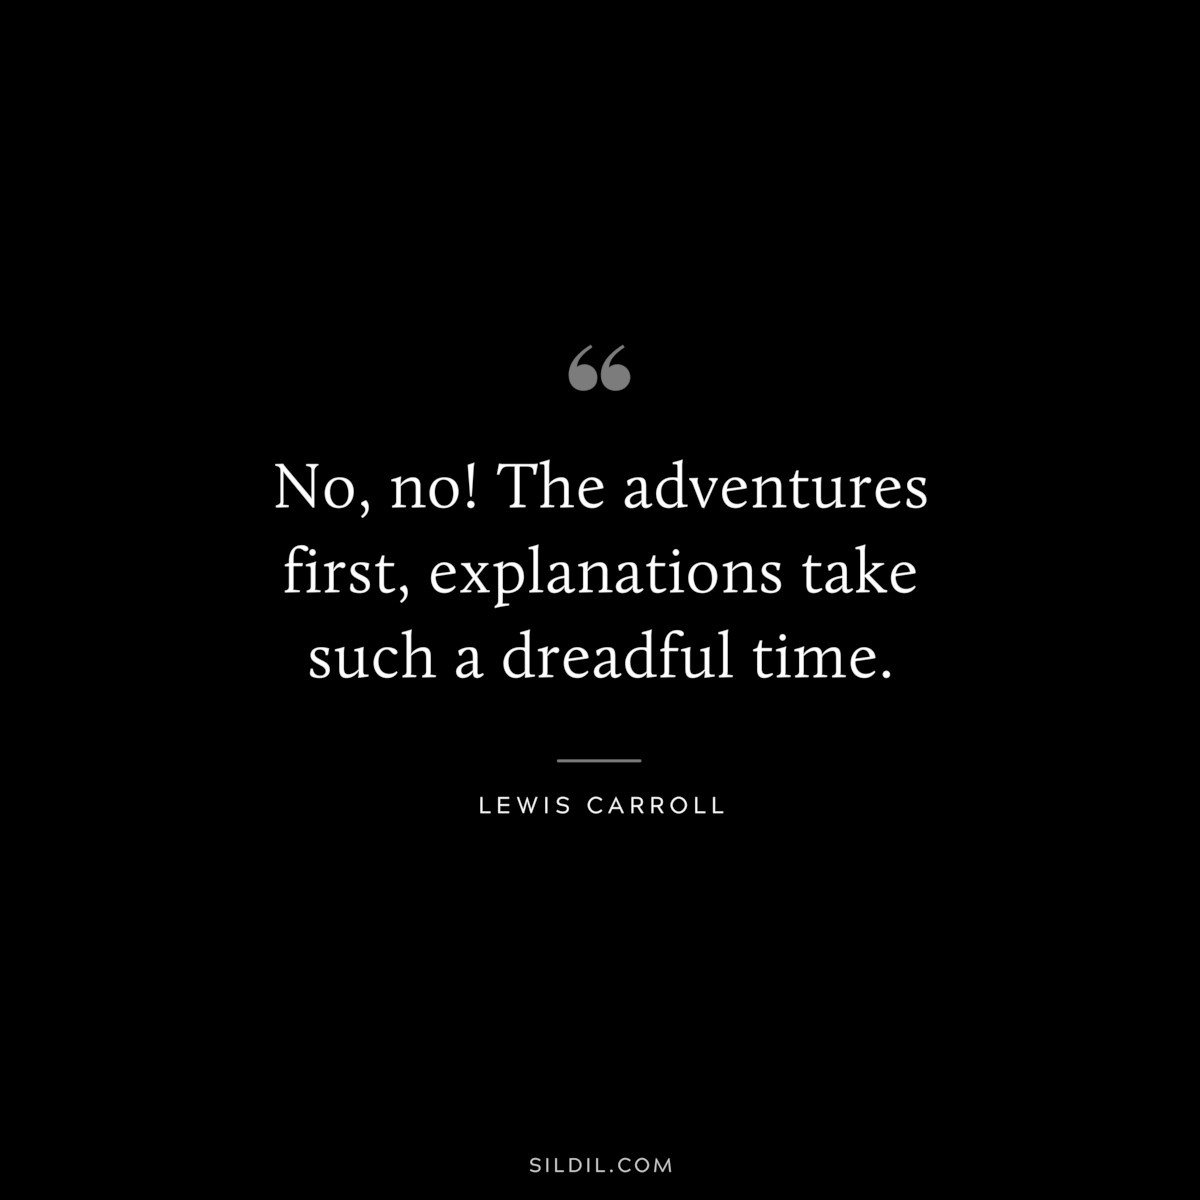 No, no! The adventures first, explanations take such a dreadful time.